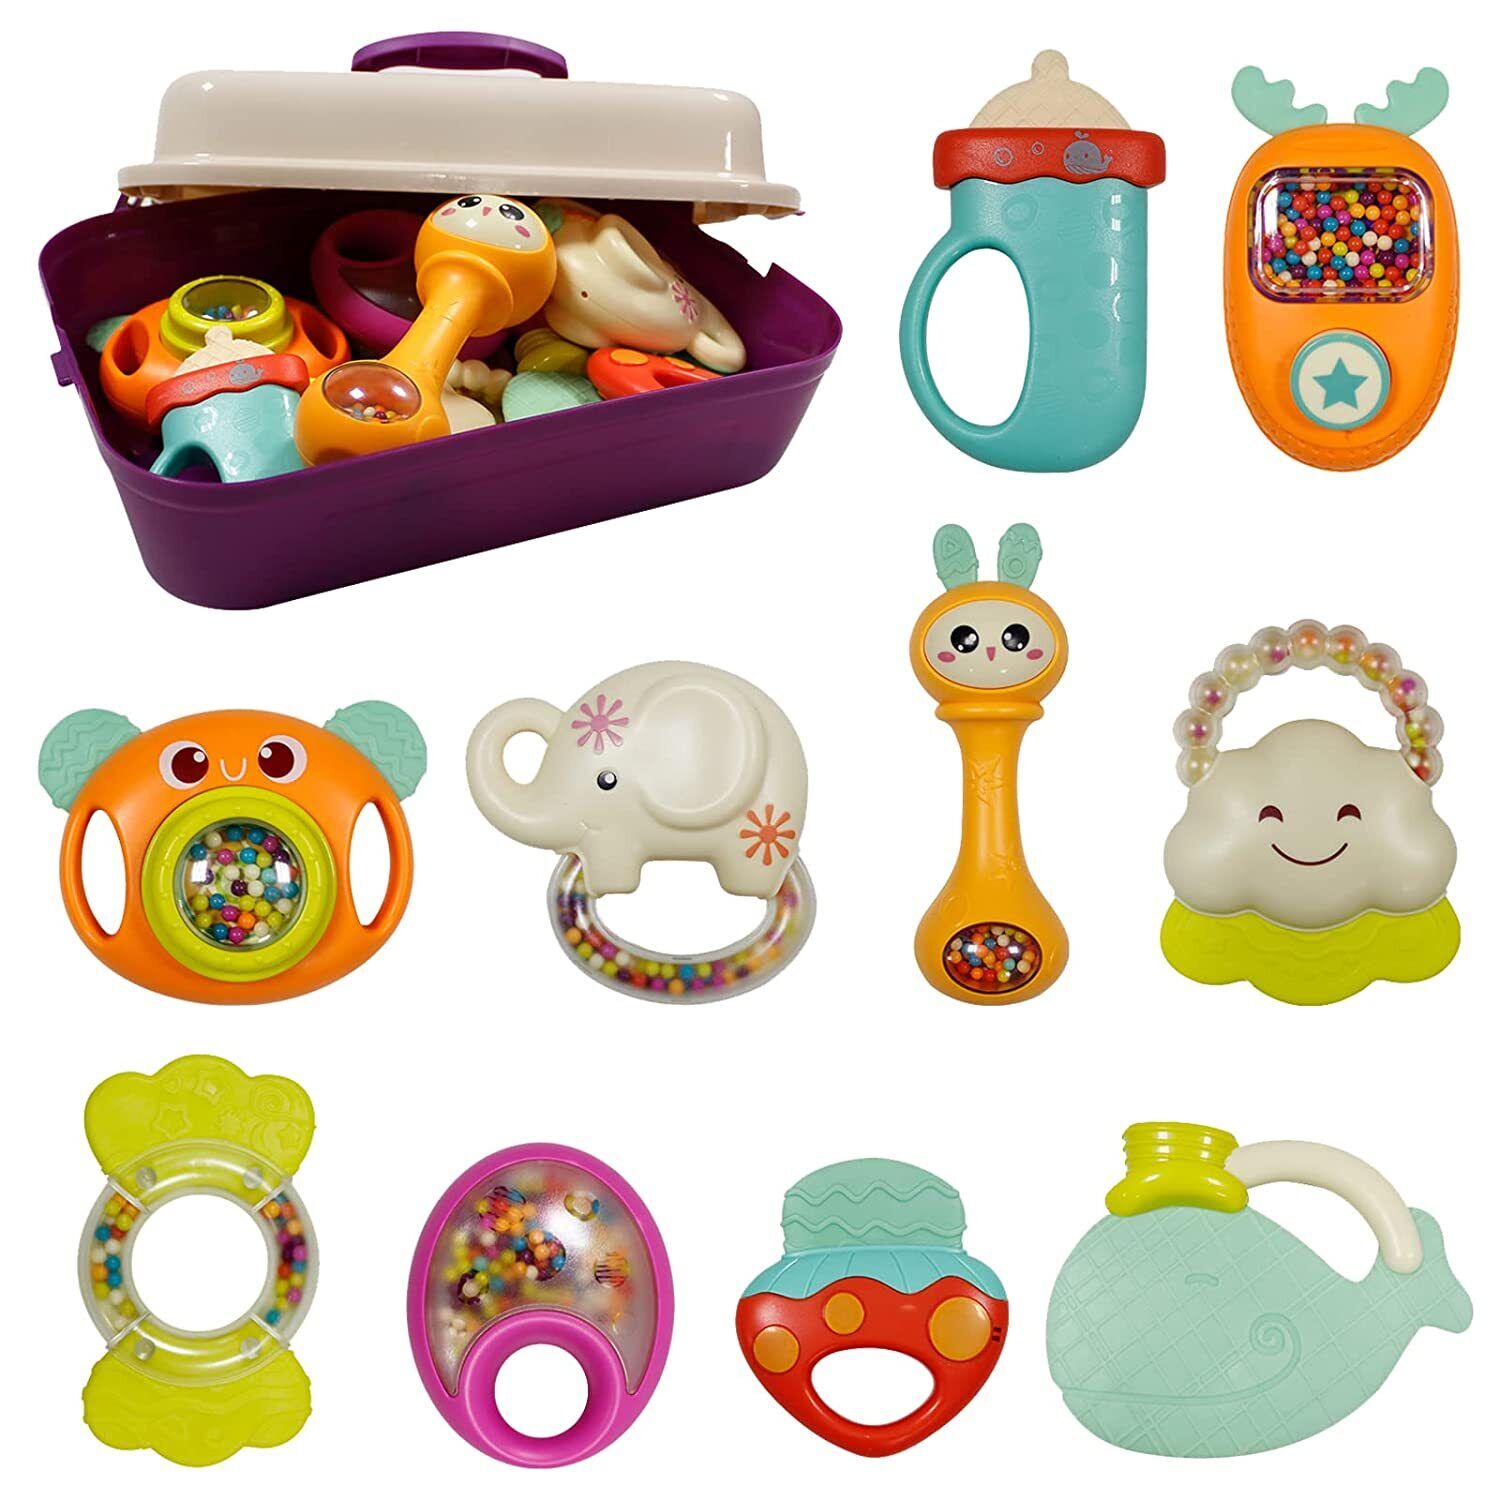 10-Piece Baby Rattles and Teethers Set